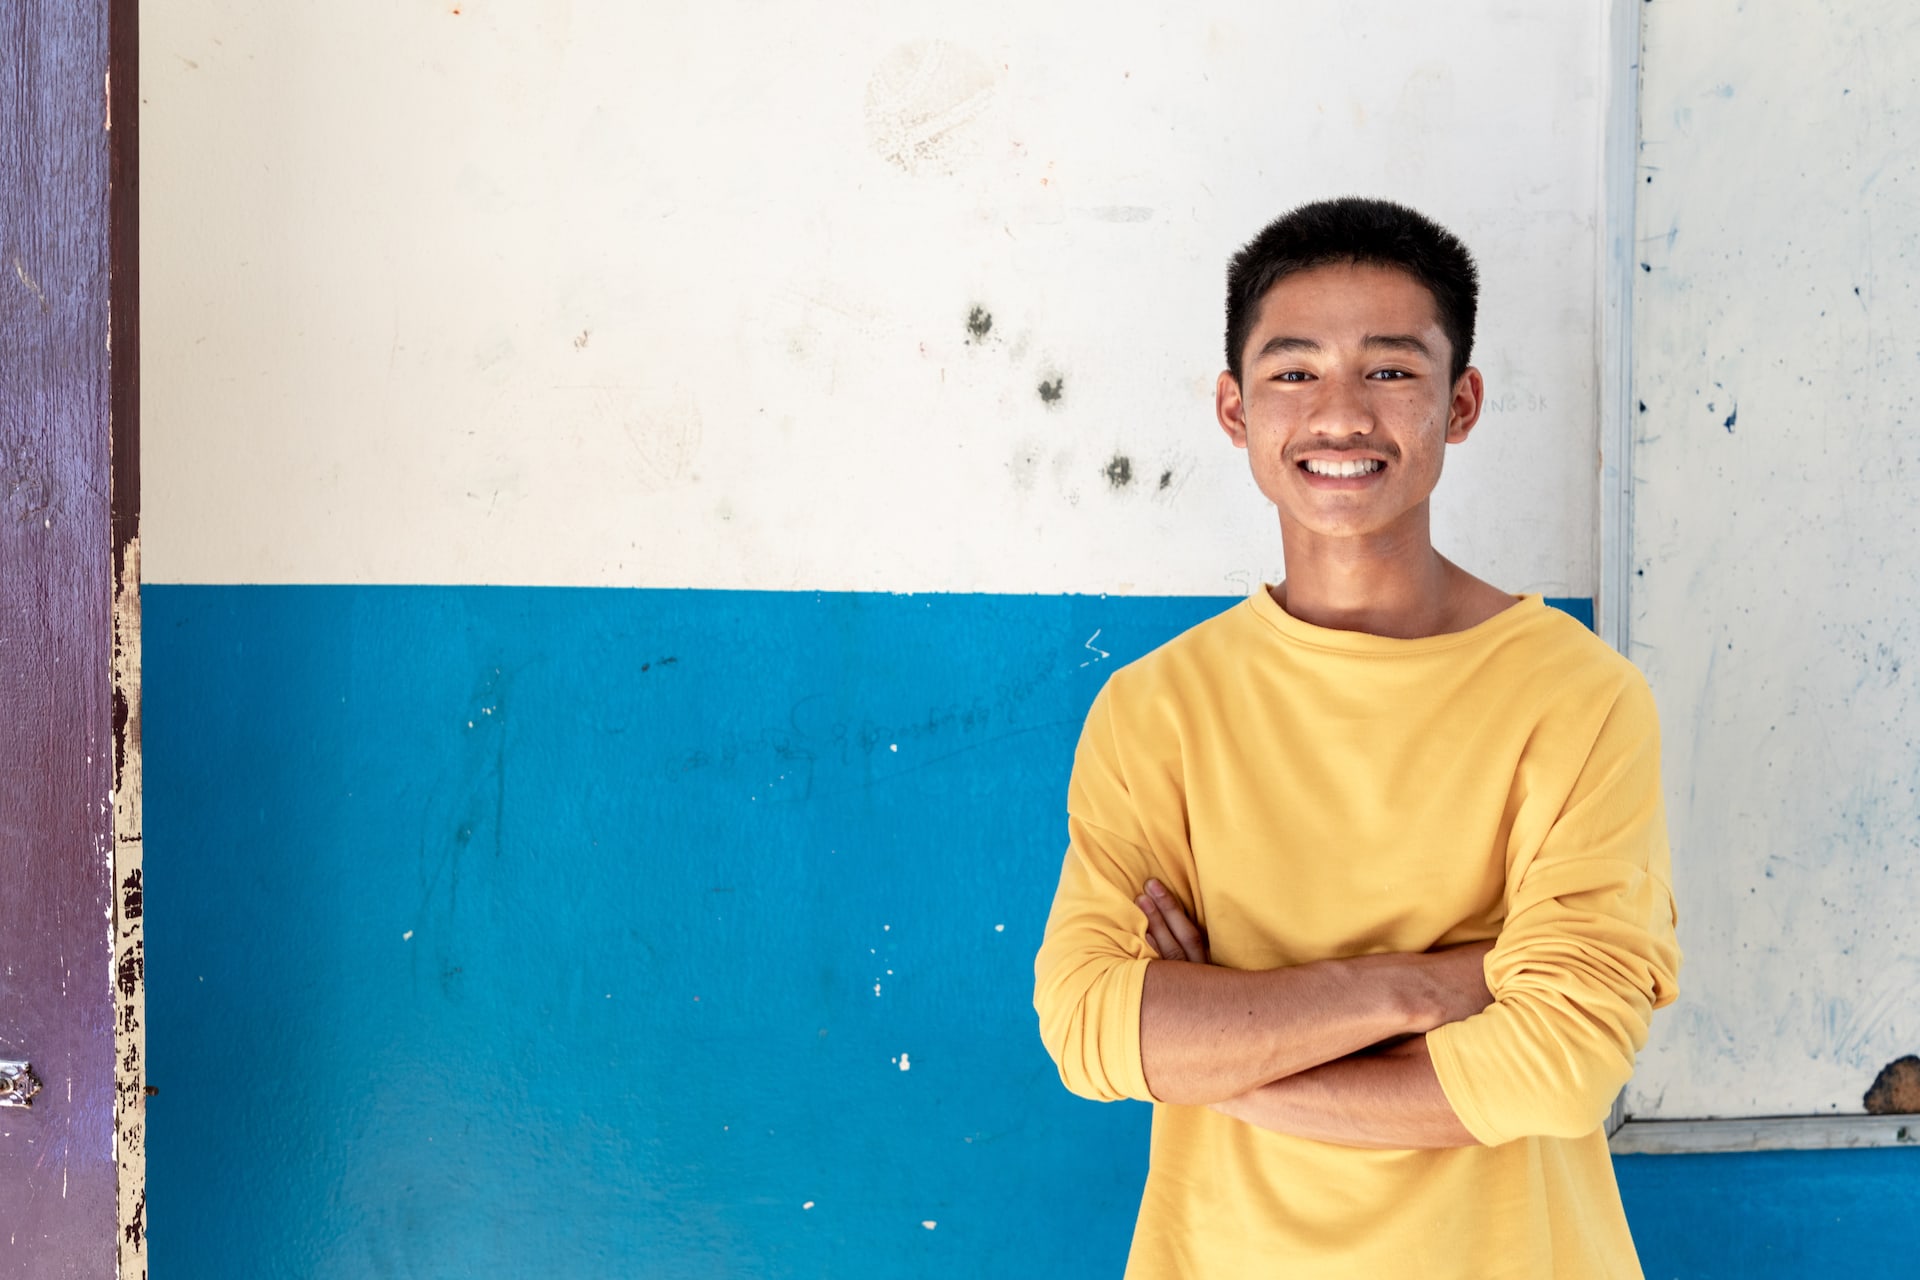 A portrait of 15-year-old Adun, a member of the soccer team from the Thai cave rescue. He is looking at the camera, smiling with his arms crossed. He is wearing a mustard yellow crew-neck long sleeve shirt.